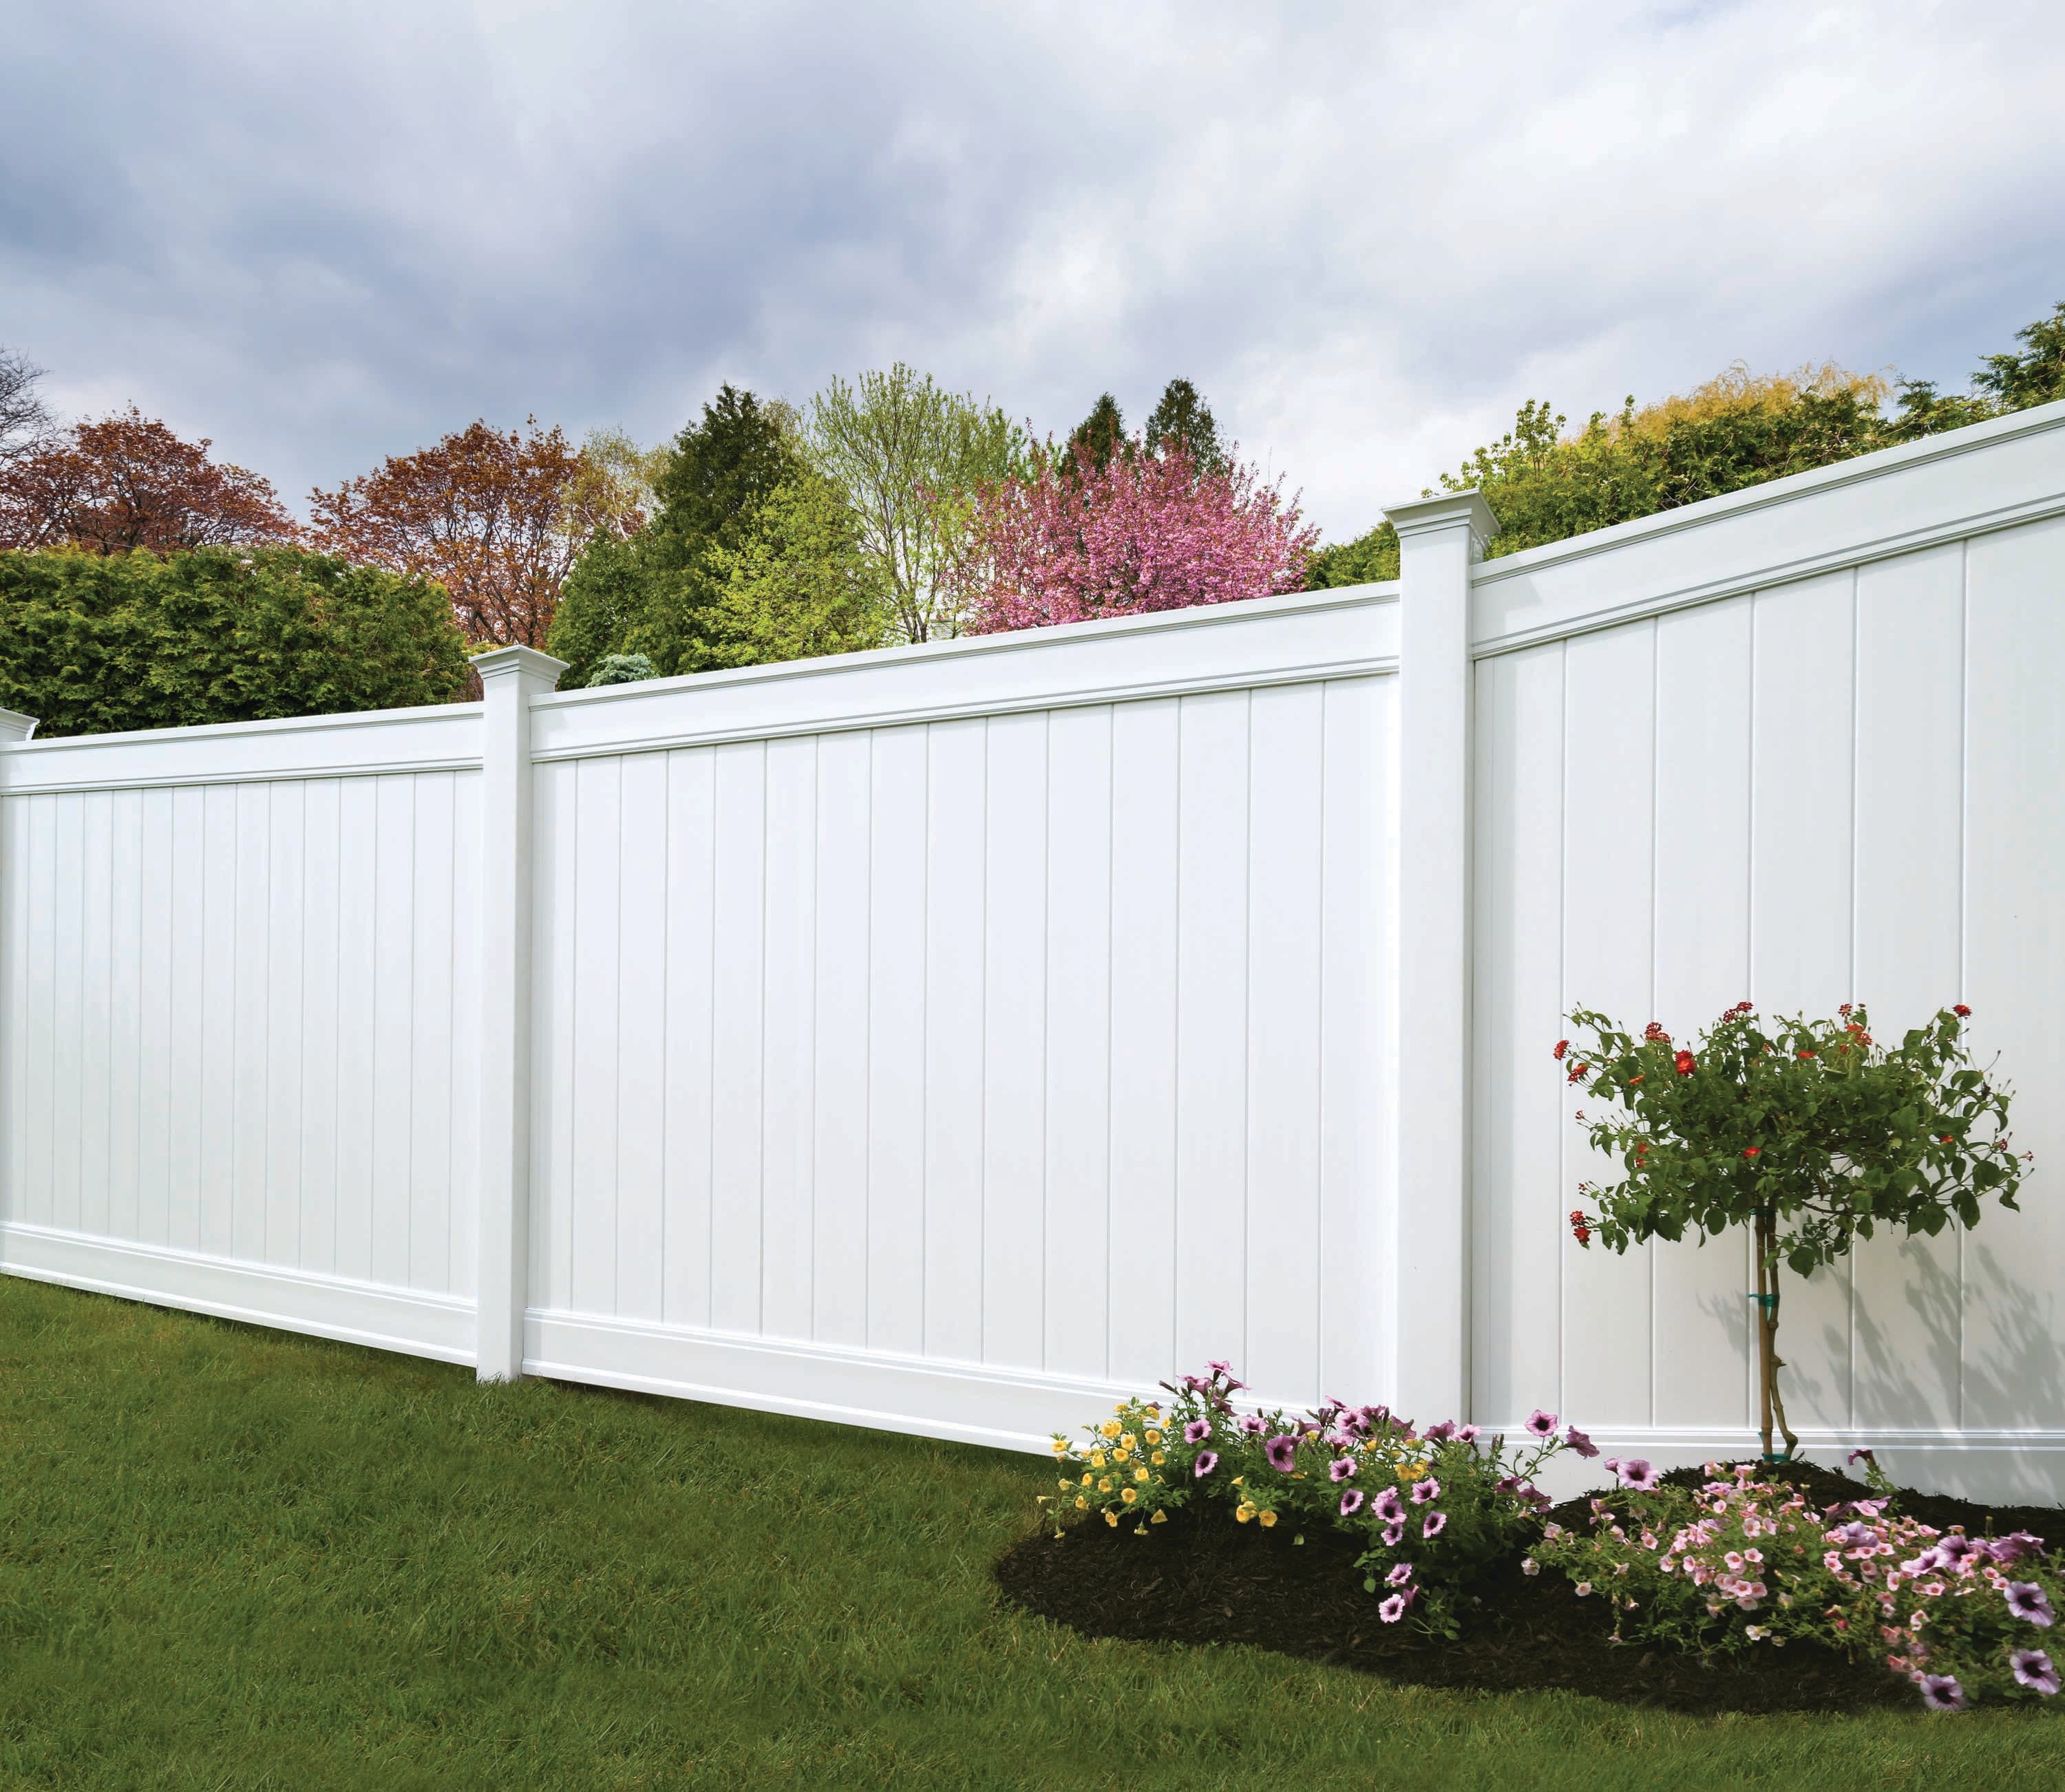 Shop Freedom 6x8 Emblem Ready-to-Assemble Fence at Lowes